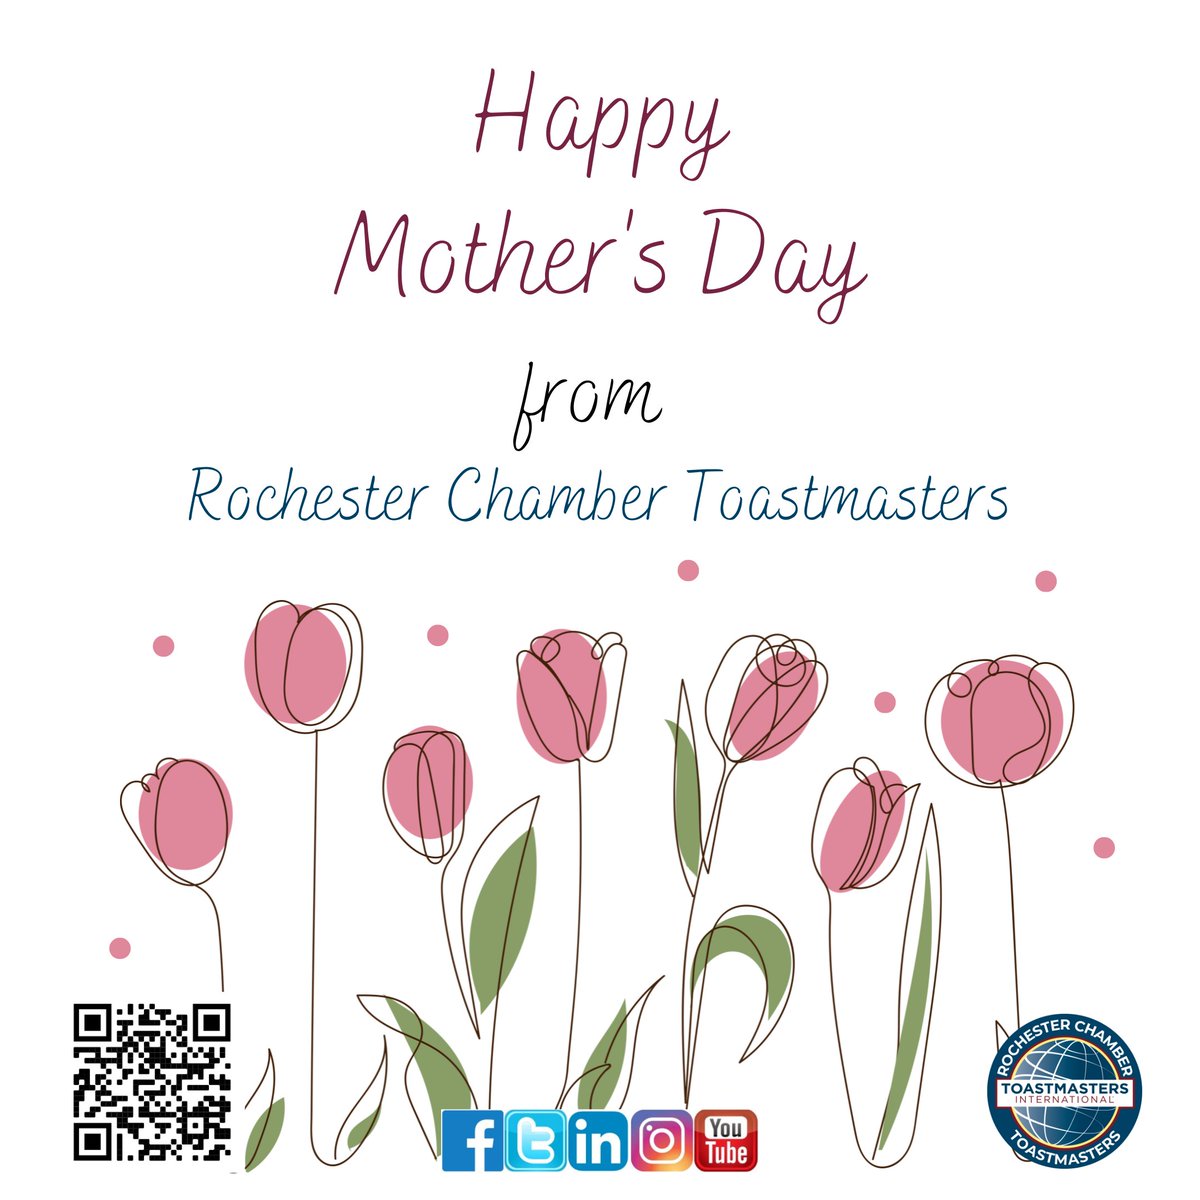 Happy Mother’s Day from Rochester Chamber #Toastmasters  #rochmn  #rochester #rochester_mn #publicspeaking #leadership #rochestermn  #neighborshare #neighborstory #mothersday #momsday